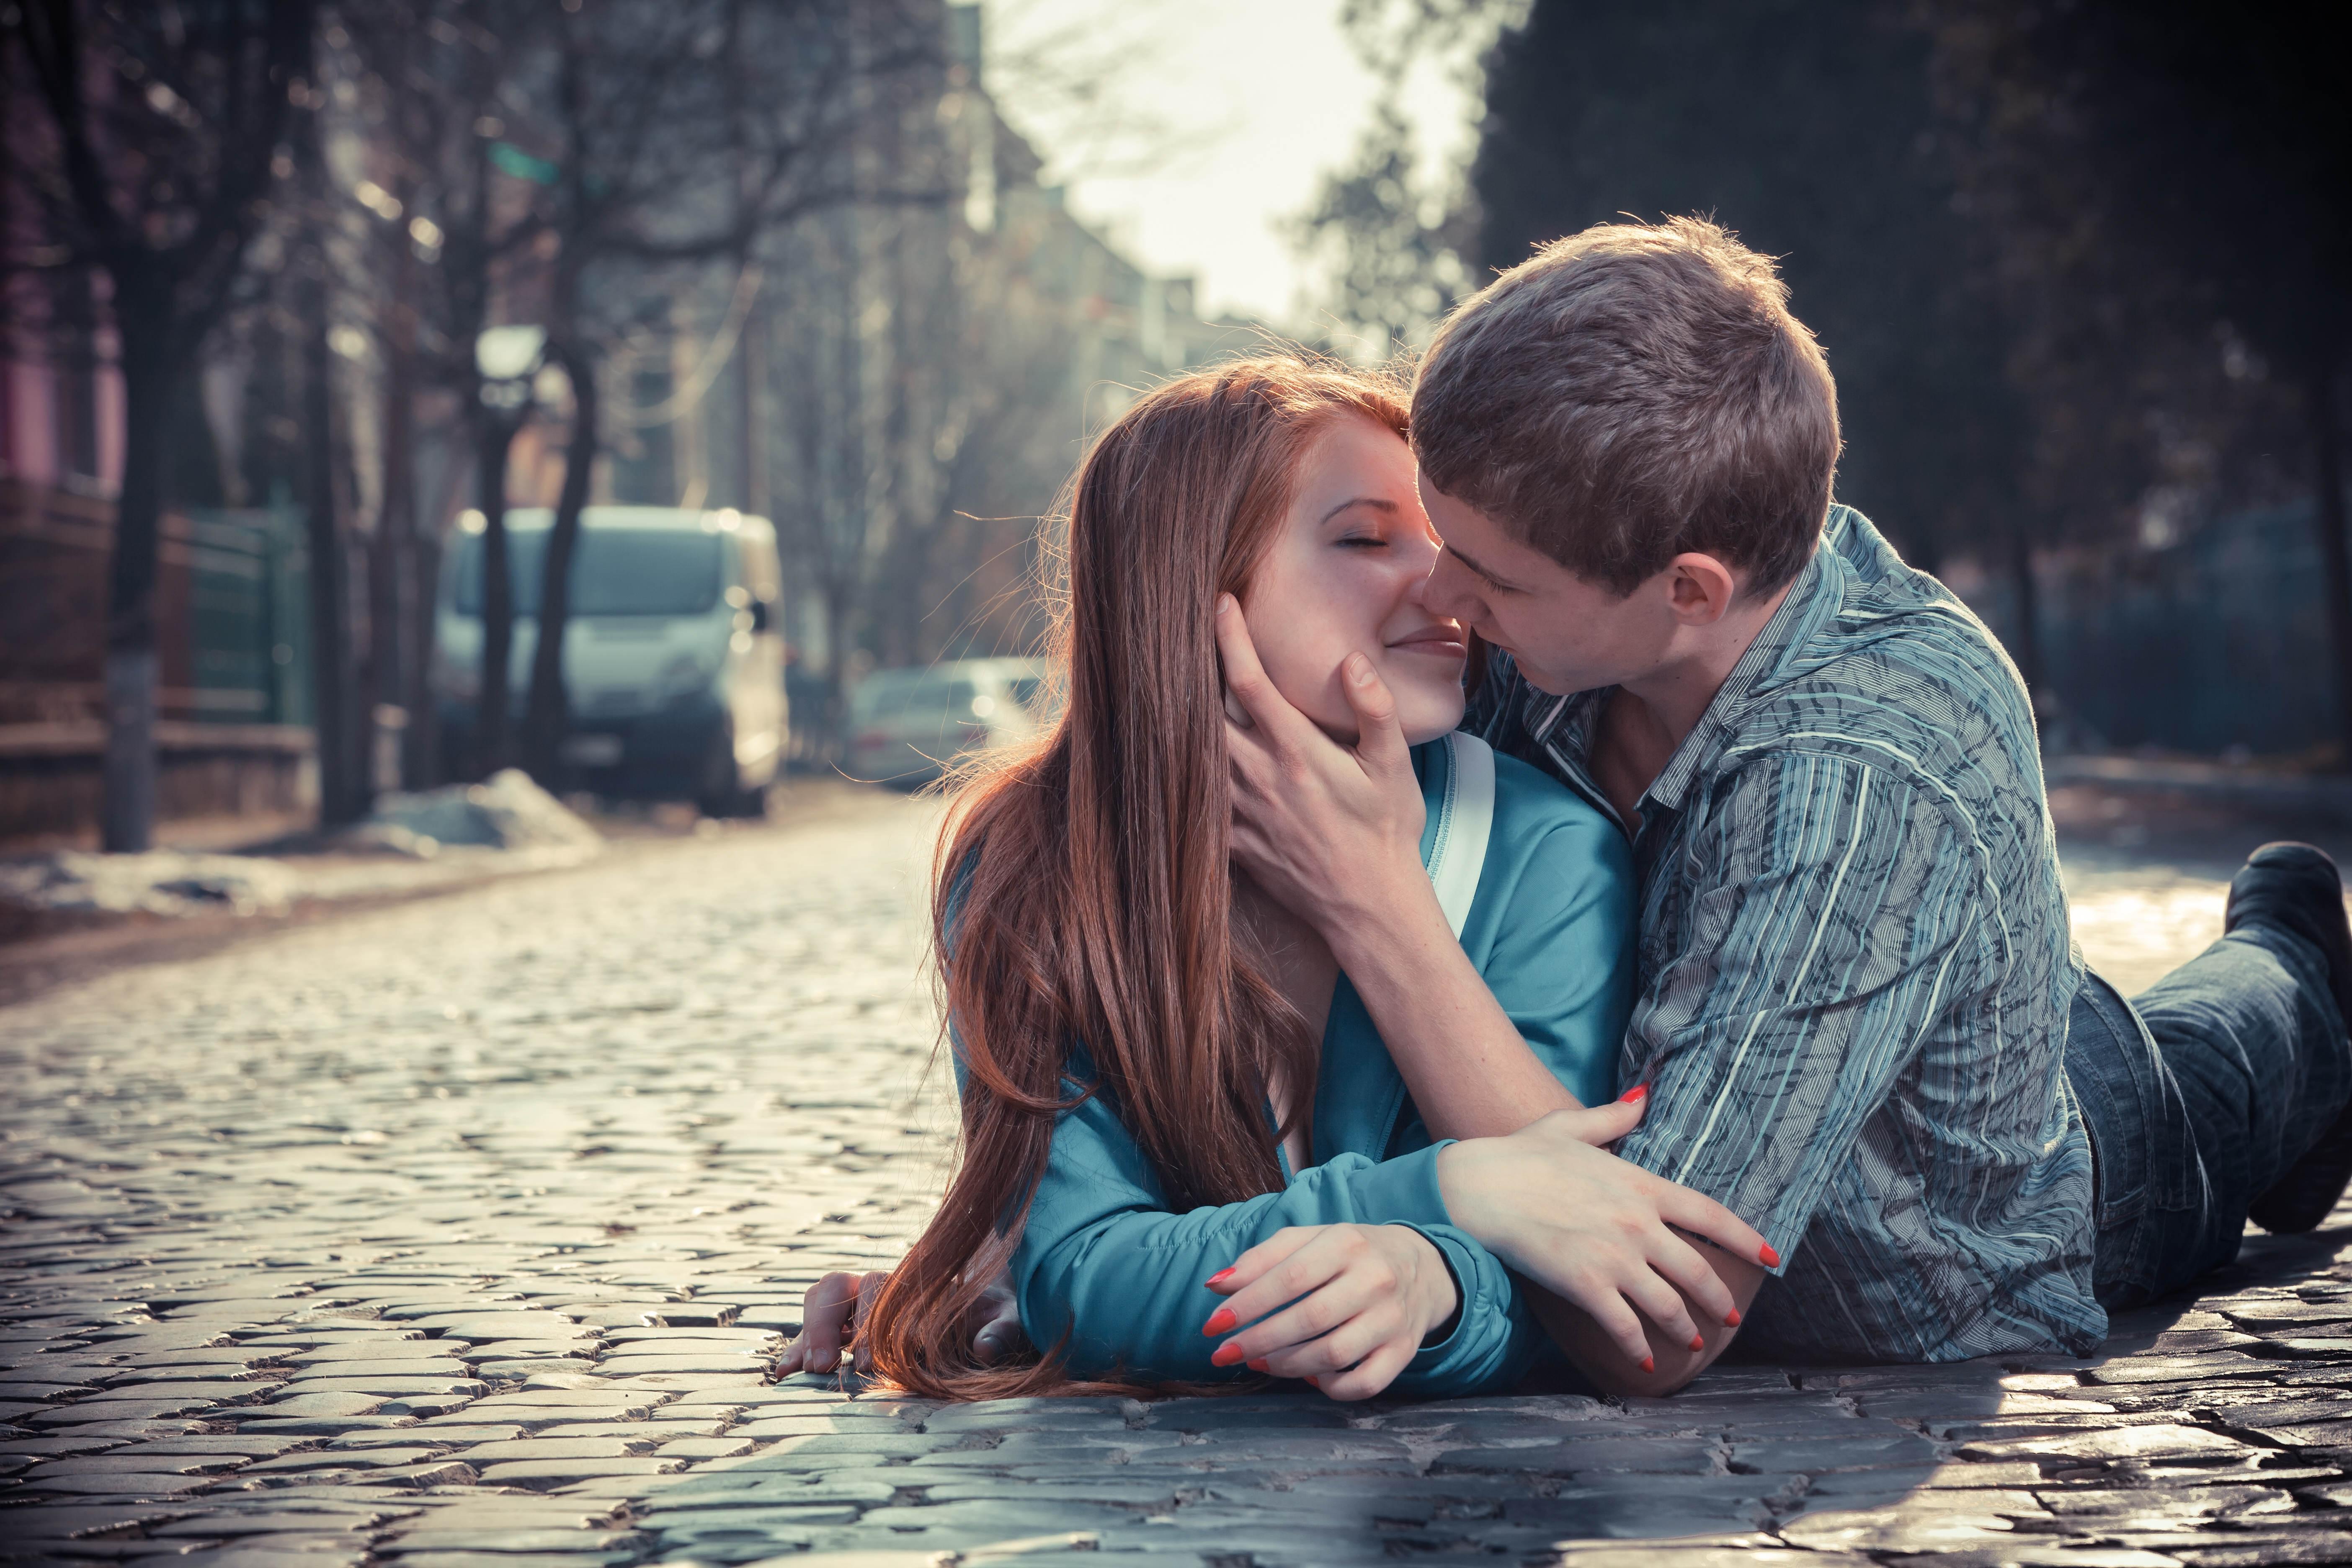 Download wallpapers 5616x3744 boy, girl, kissing, love, road.